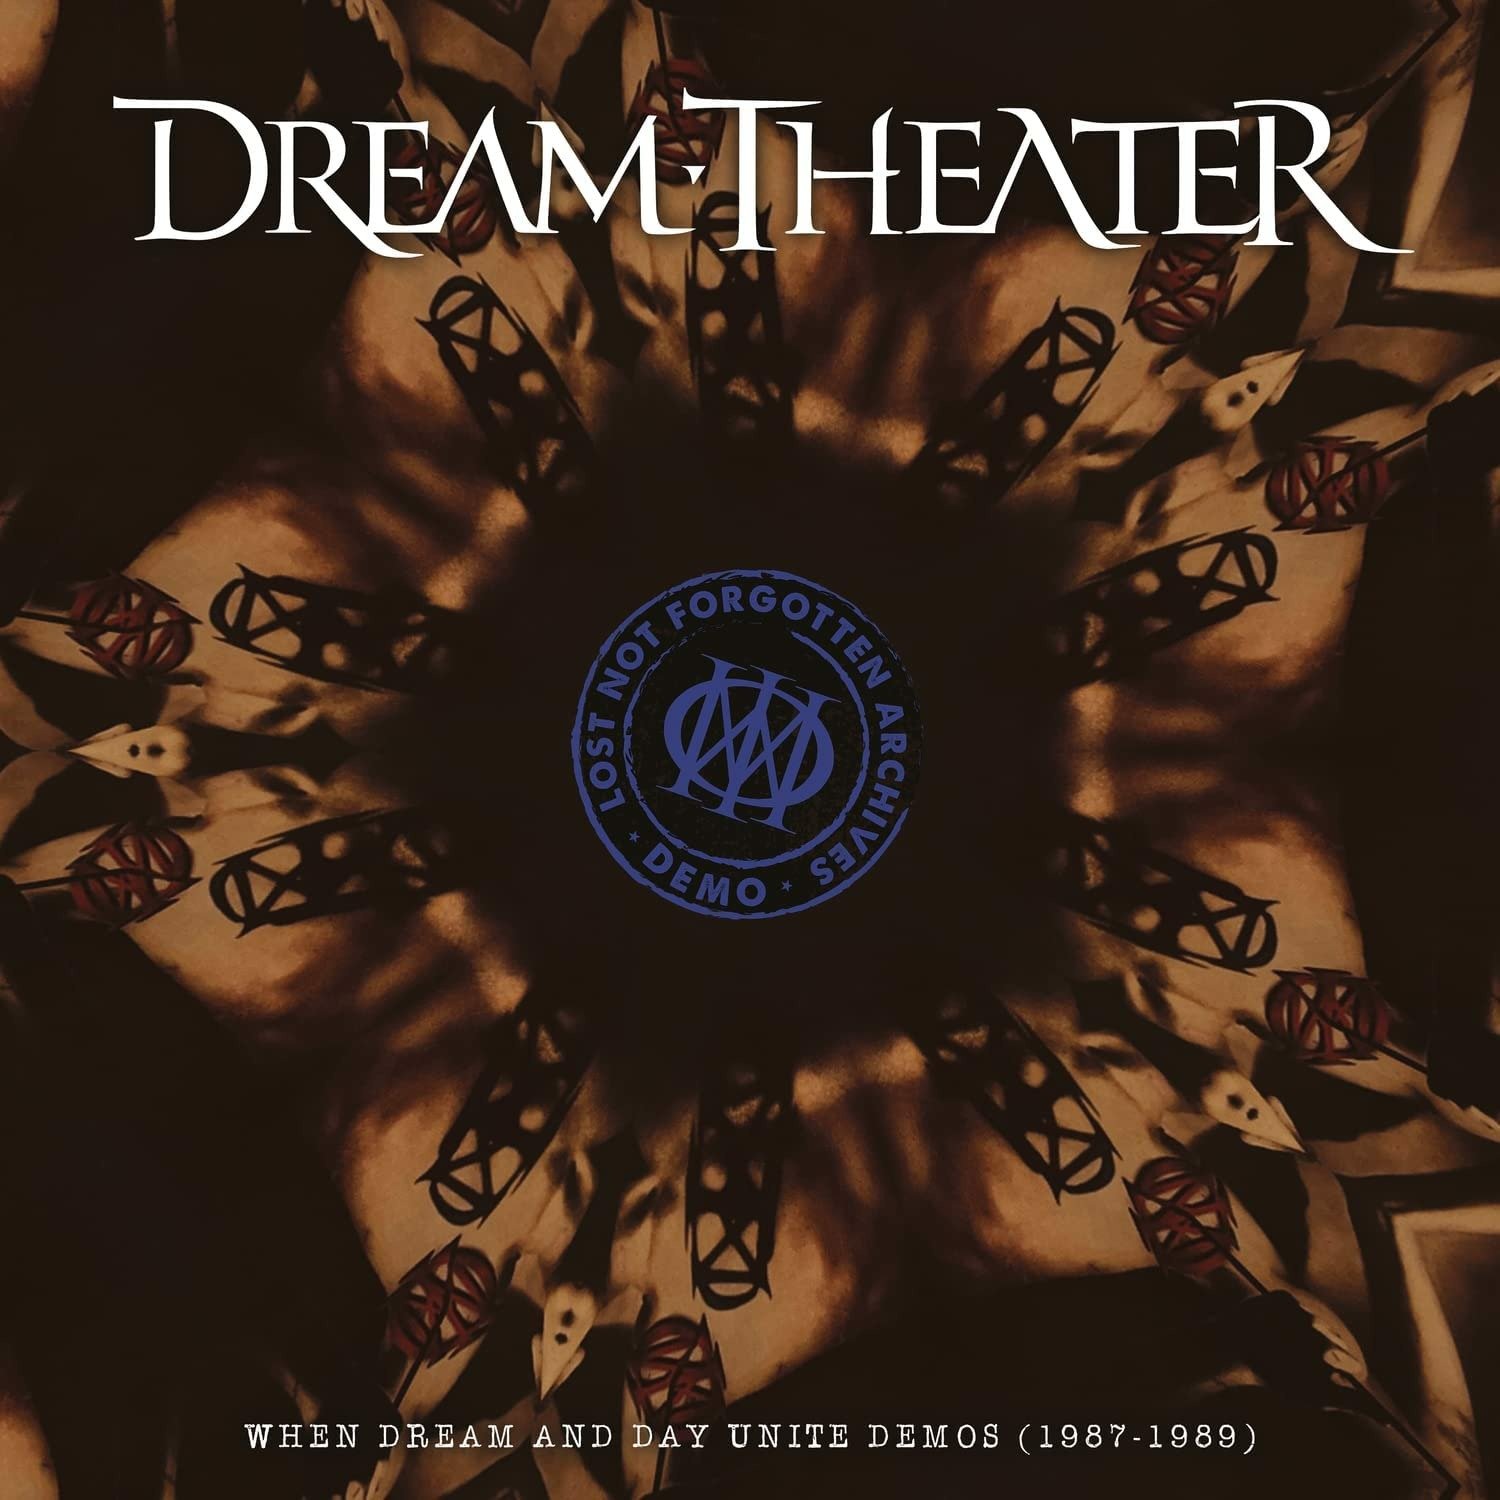 CD Shop - DREAM THEATER LOST NOT FORGOTTEN ARCHIVES: WHEN DREAM AND DAY UNITE DEMOS (1987-1989) -LTD- / RED V